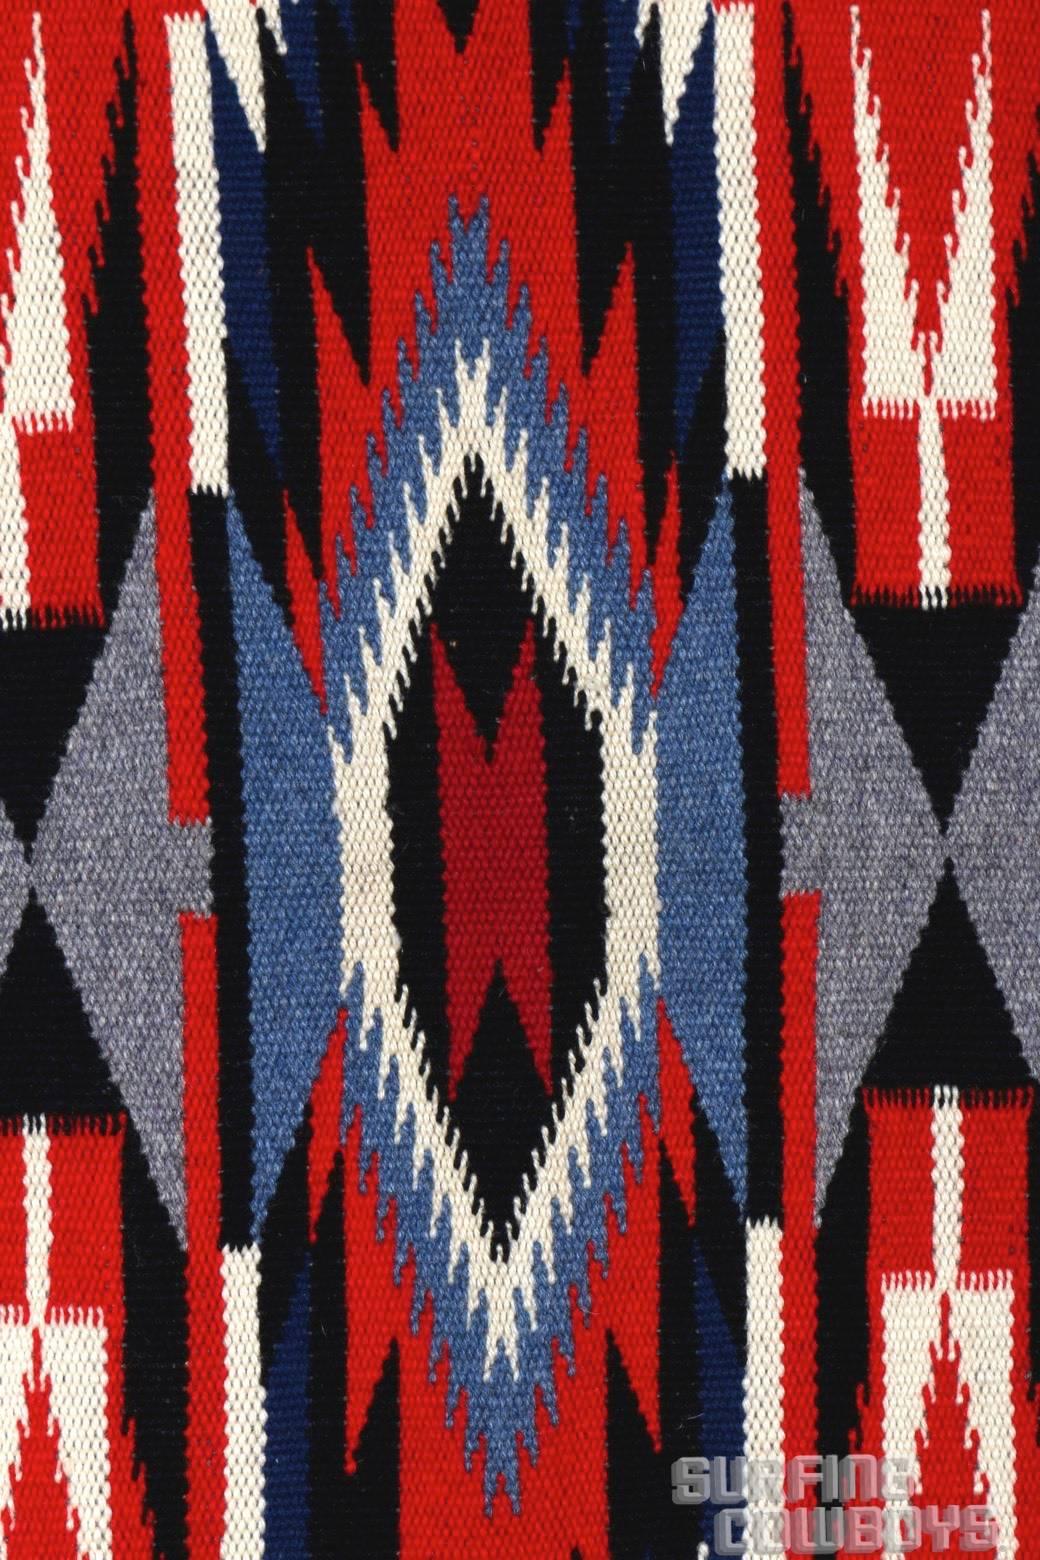 Stunning, circa 1930s handwoven Chimayo blanket in unused, virtually mint condition with vibrant colors and striking design. It's rare to find an original blanket from this period in such amazing condition.

This graphically interesting and large